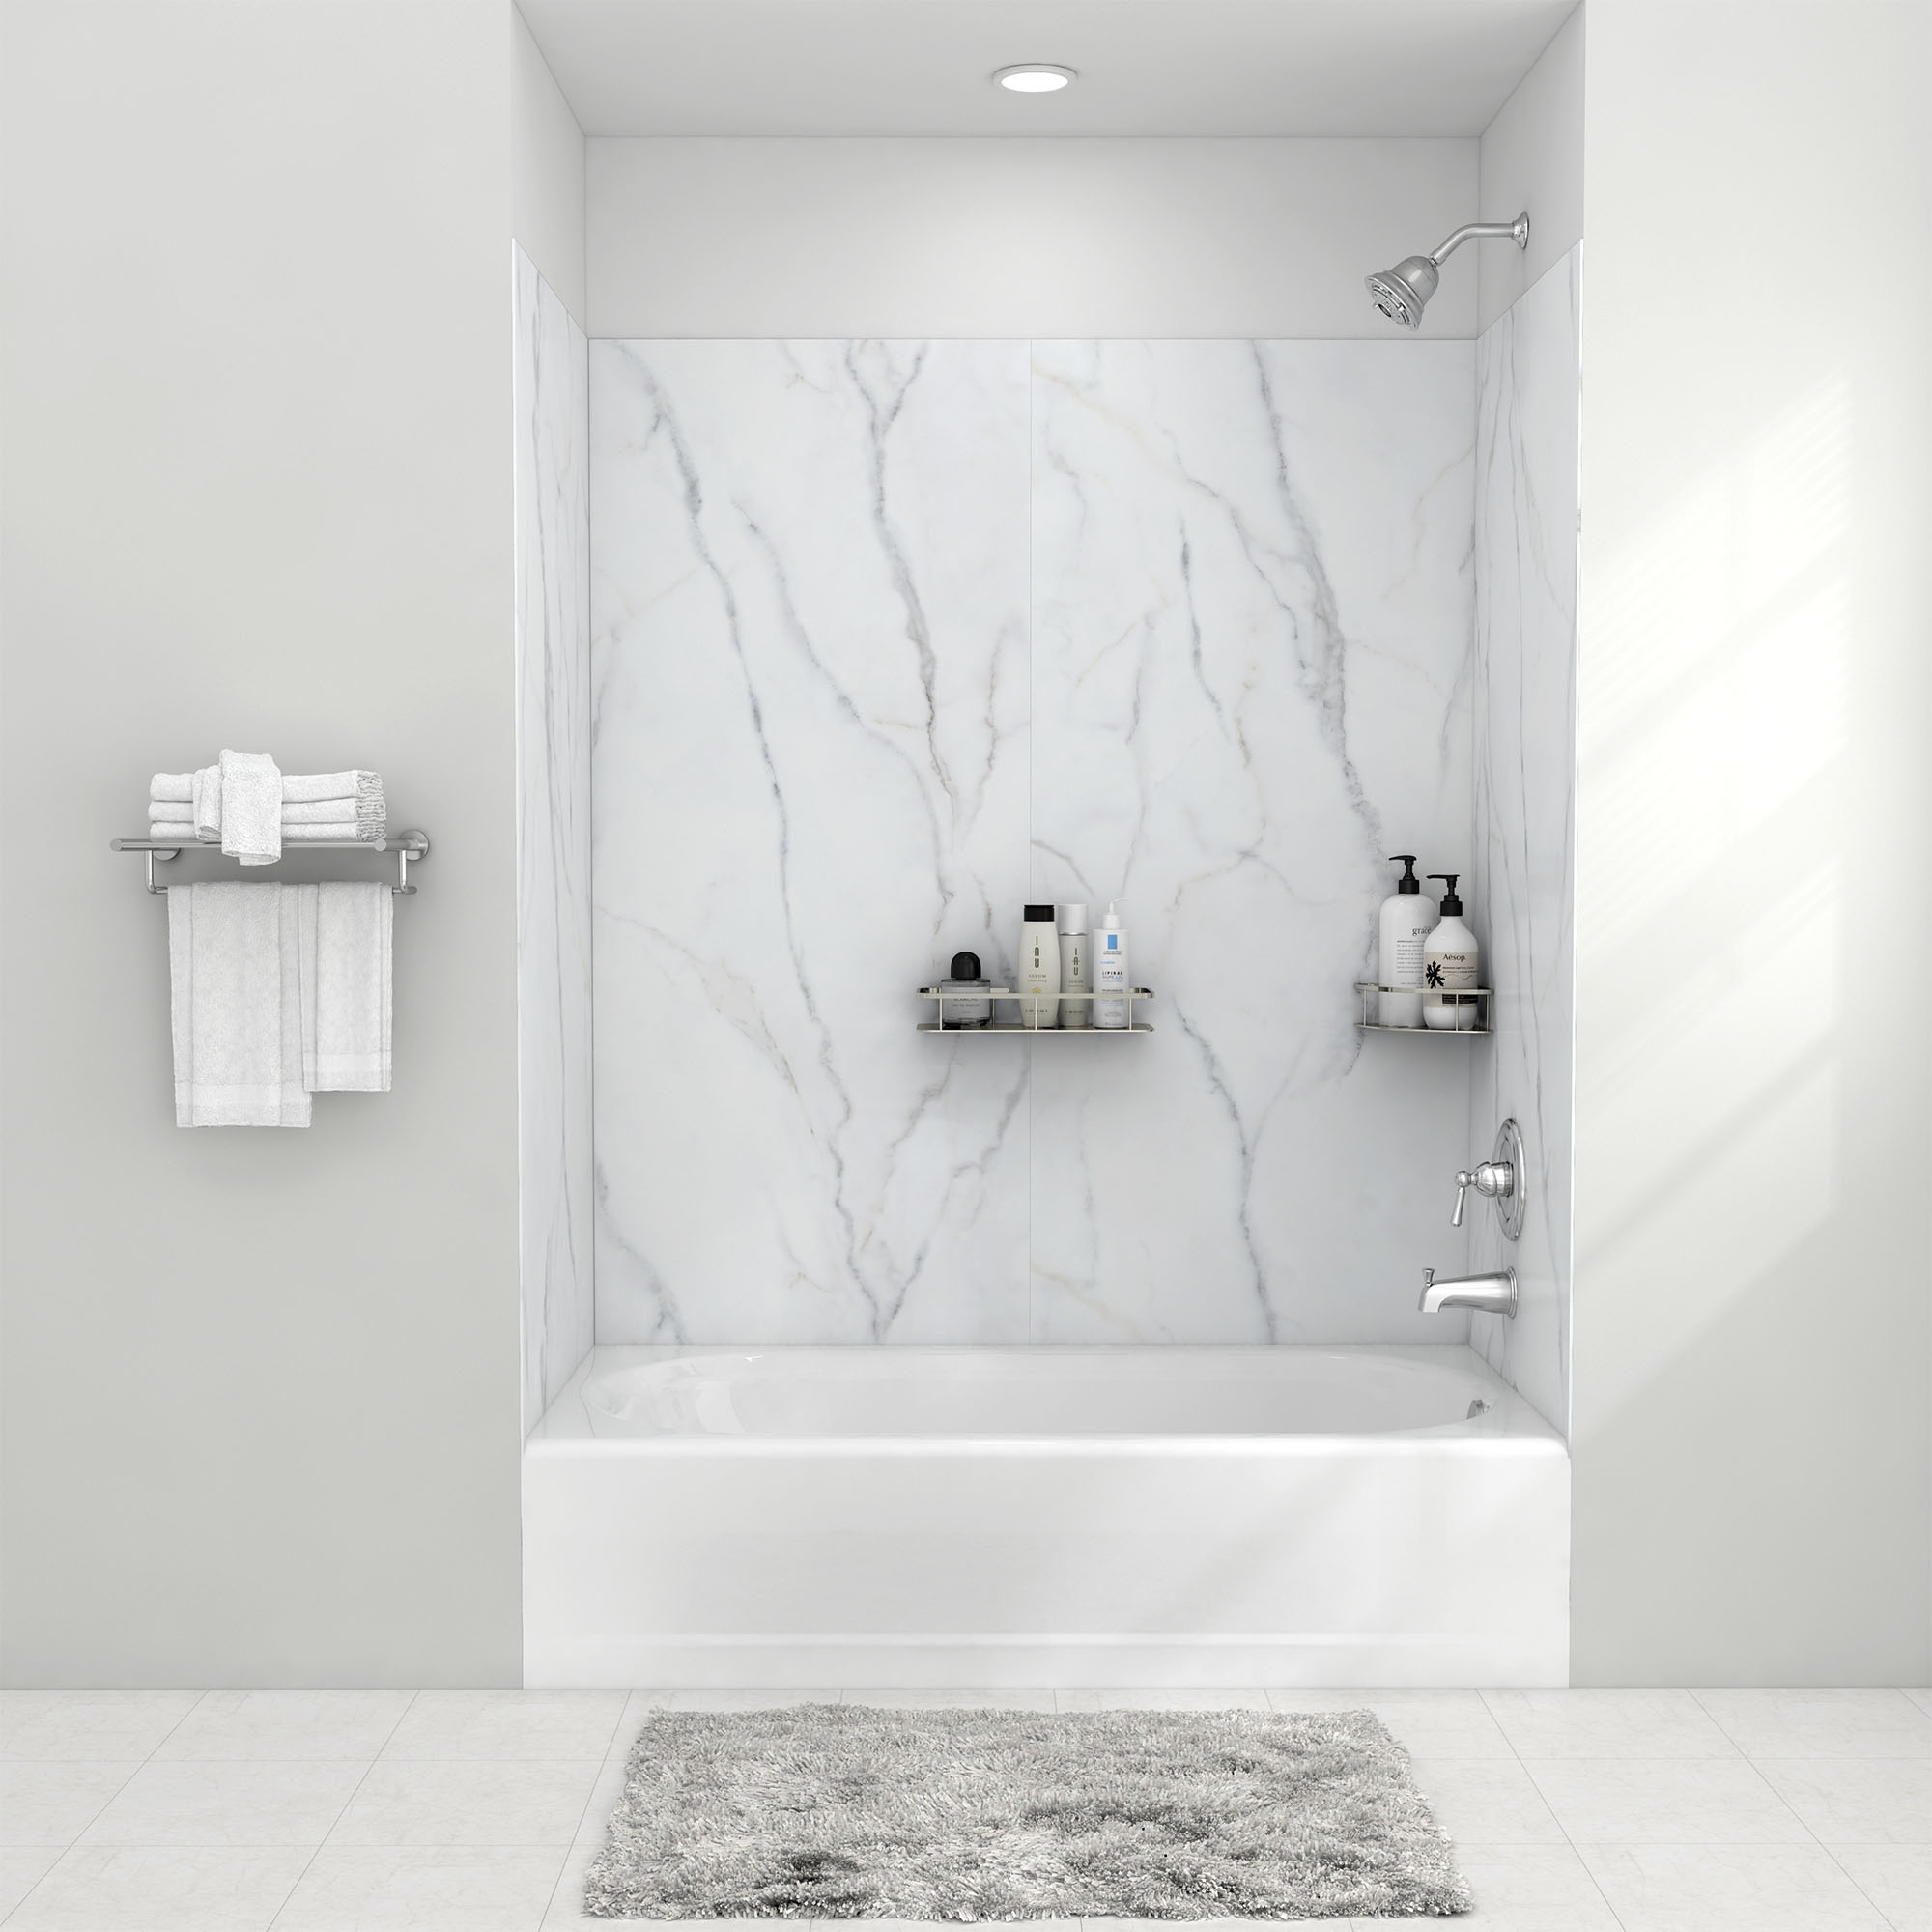 6 Tile Shower Niche Questions Answered by Experts